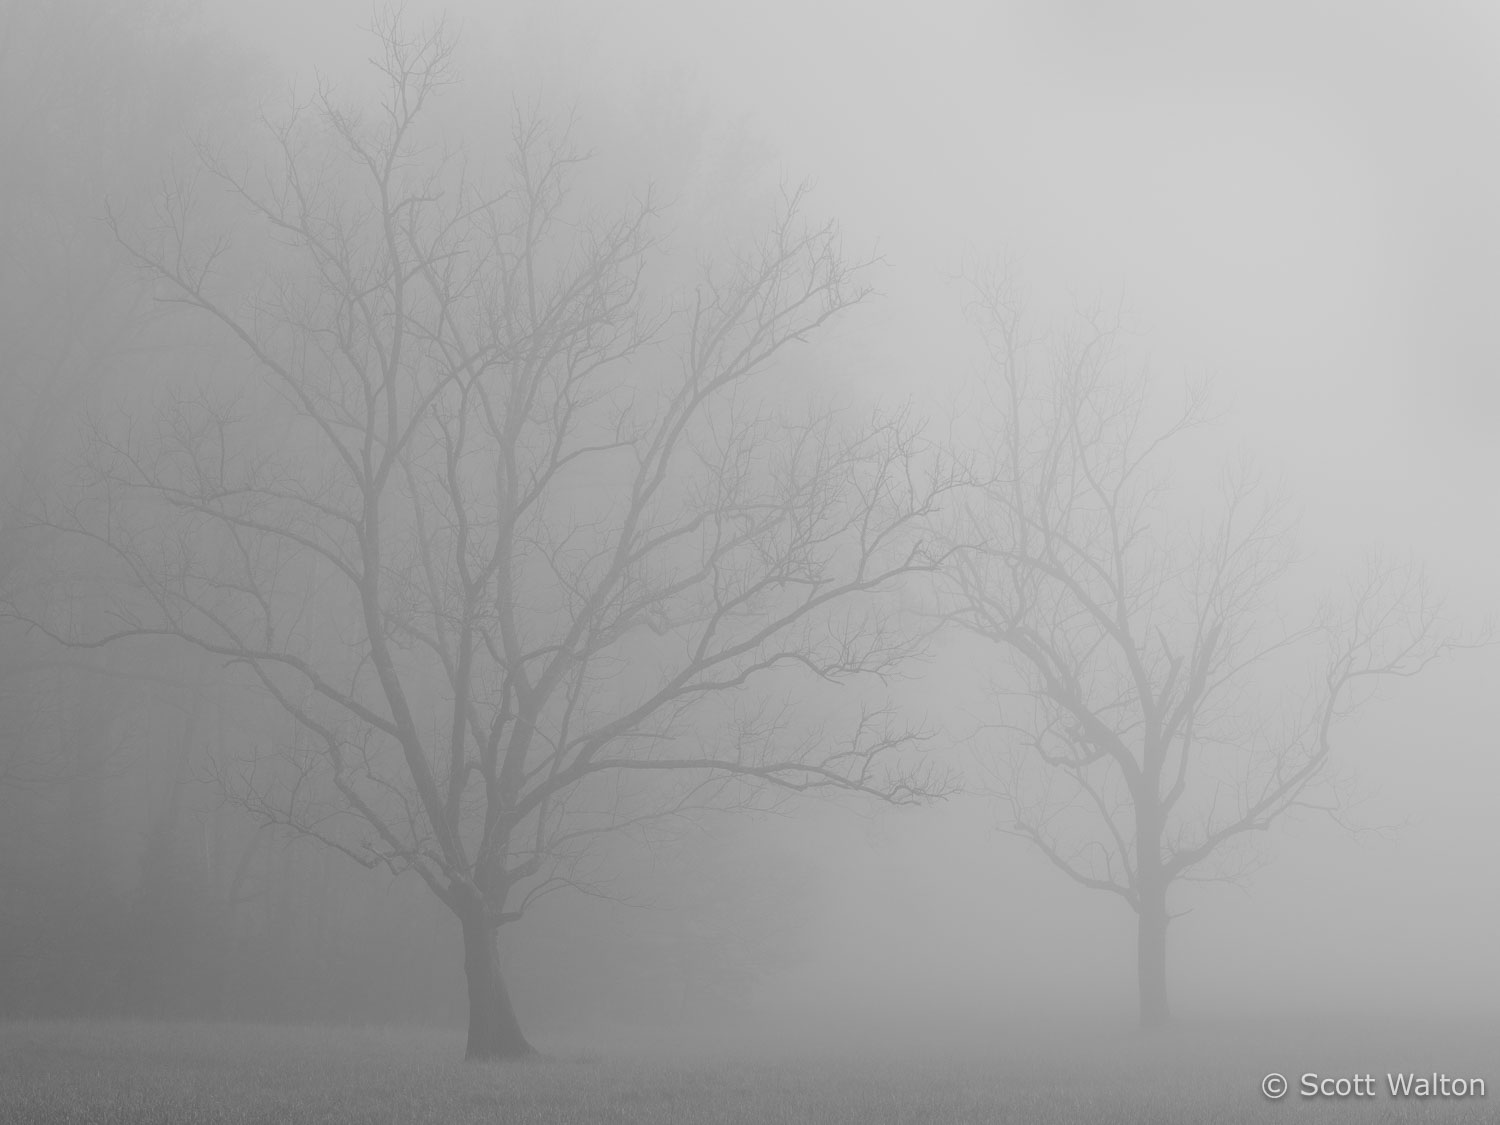 cades-cove-trees-fog-great-smoky-mountains-national-park-tennessee.jpg